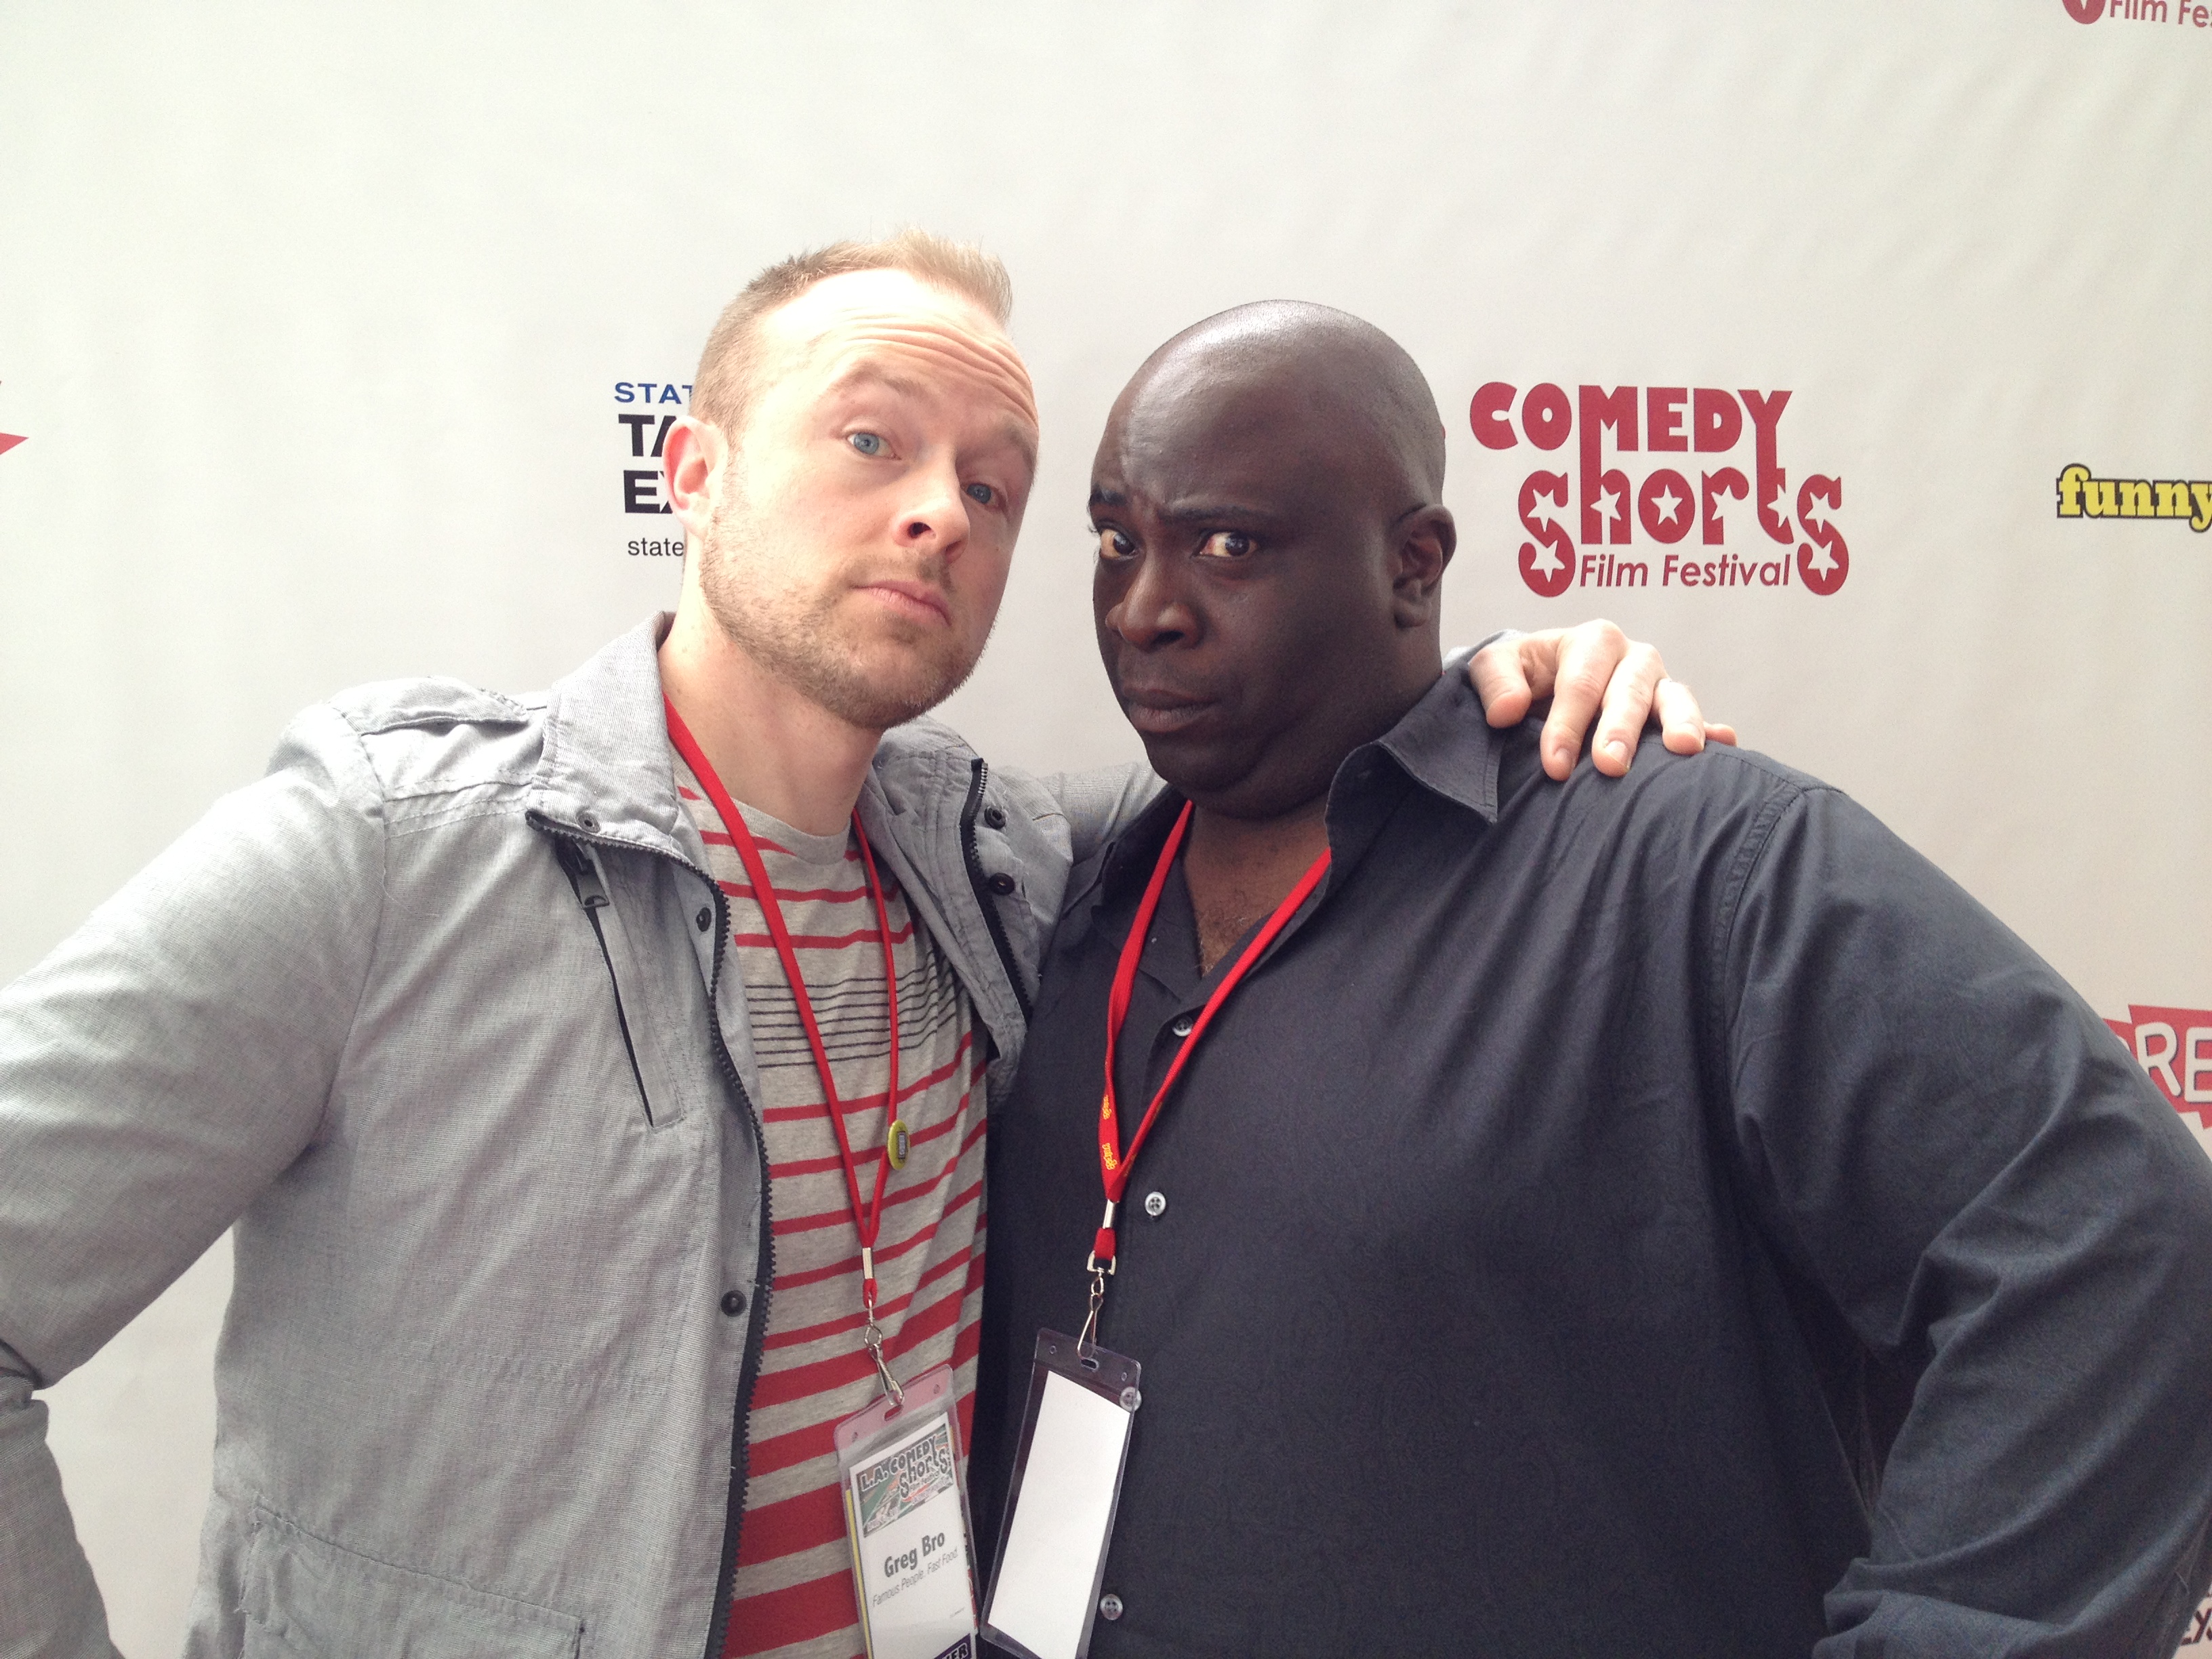 Greg Bro and Gary Anthony Williams at the L.A. Comedy Shorts Film Festival in 2013.